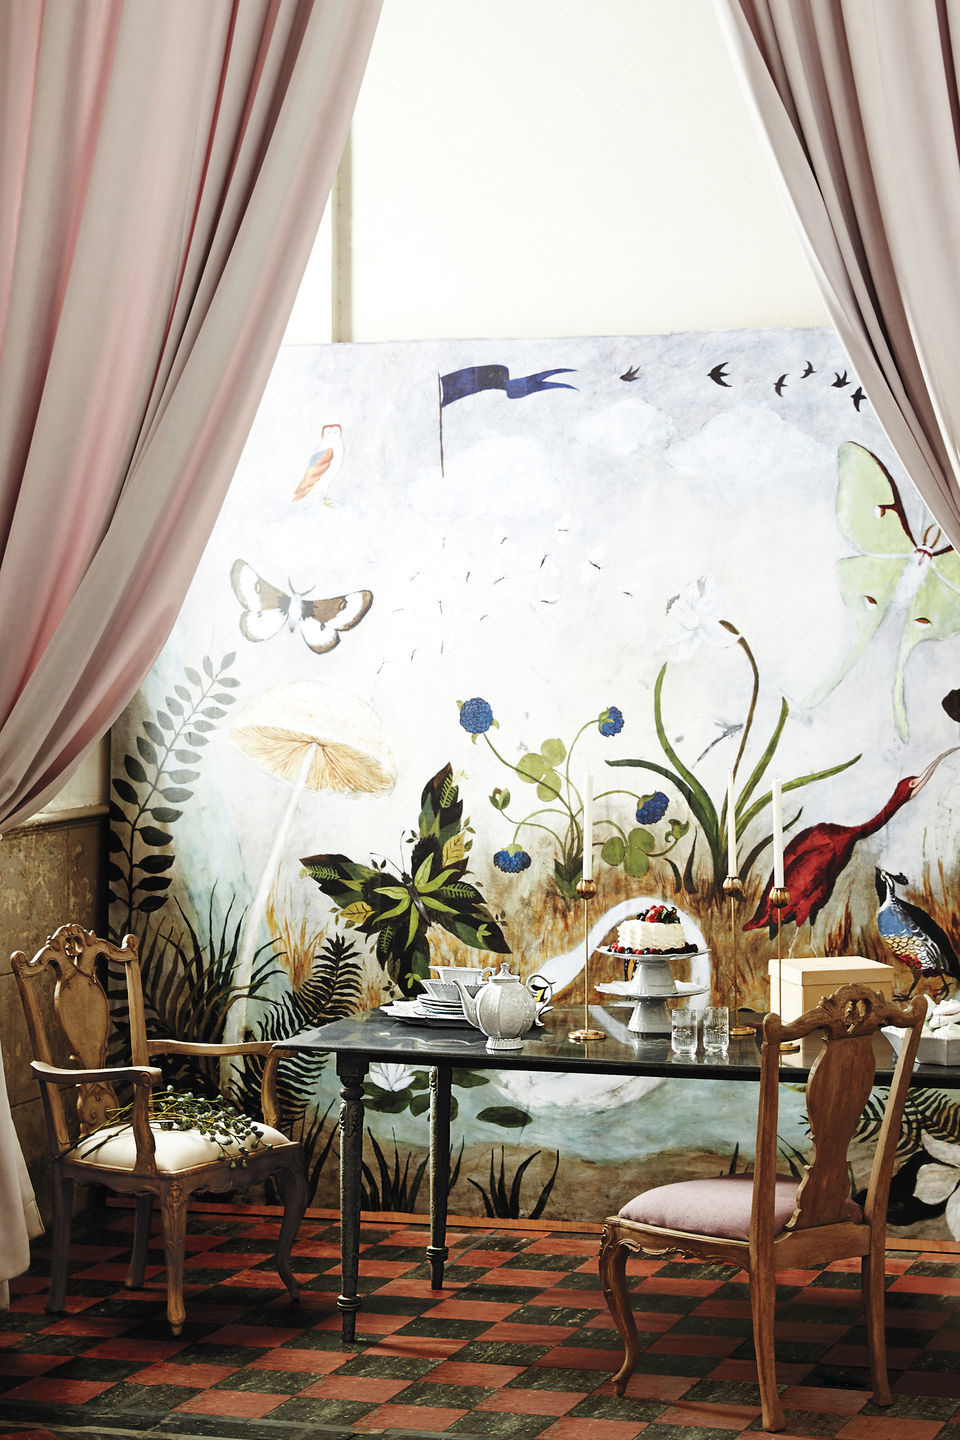 5 Home Decor Items With Butterfly Motifs For Whimsical Design Archive Nola Com